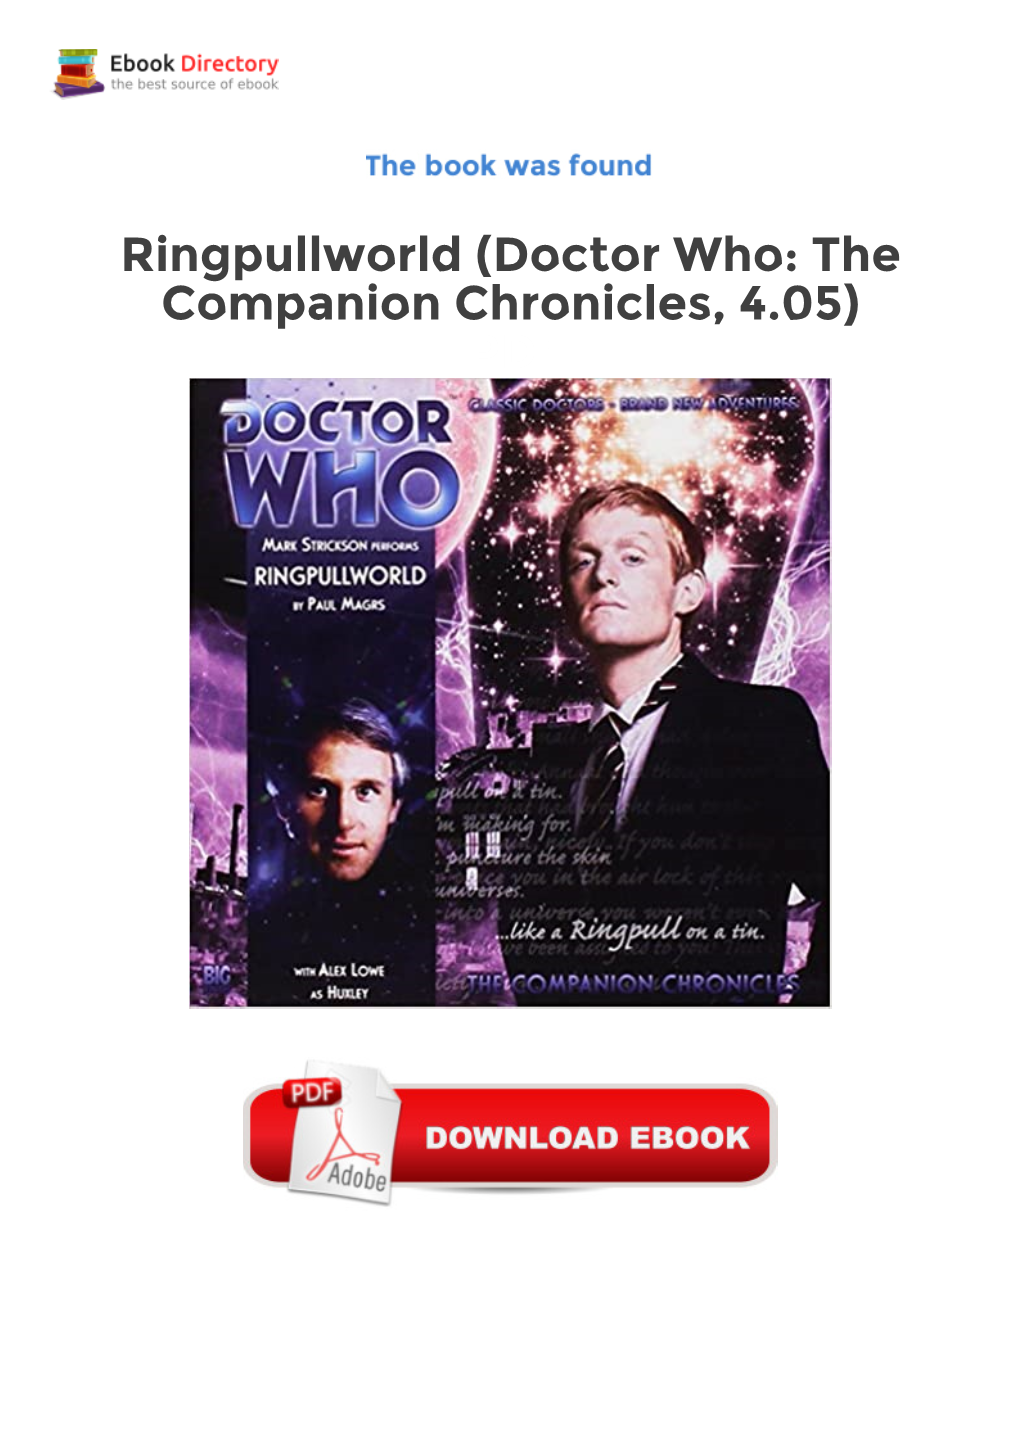 Ringpullworld (Doctor Who: the Companion Chronicles, 4.05)